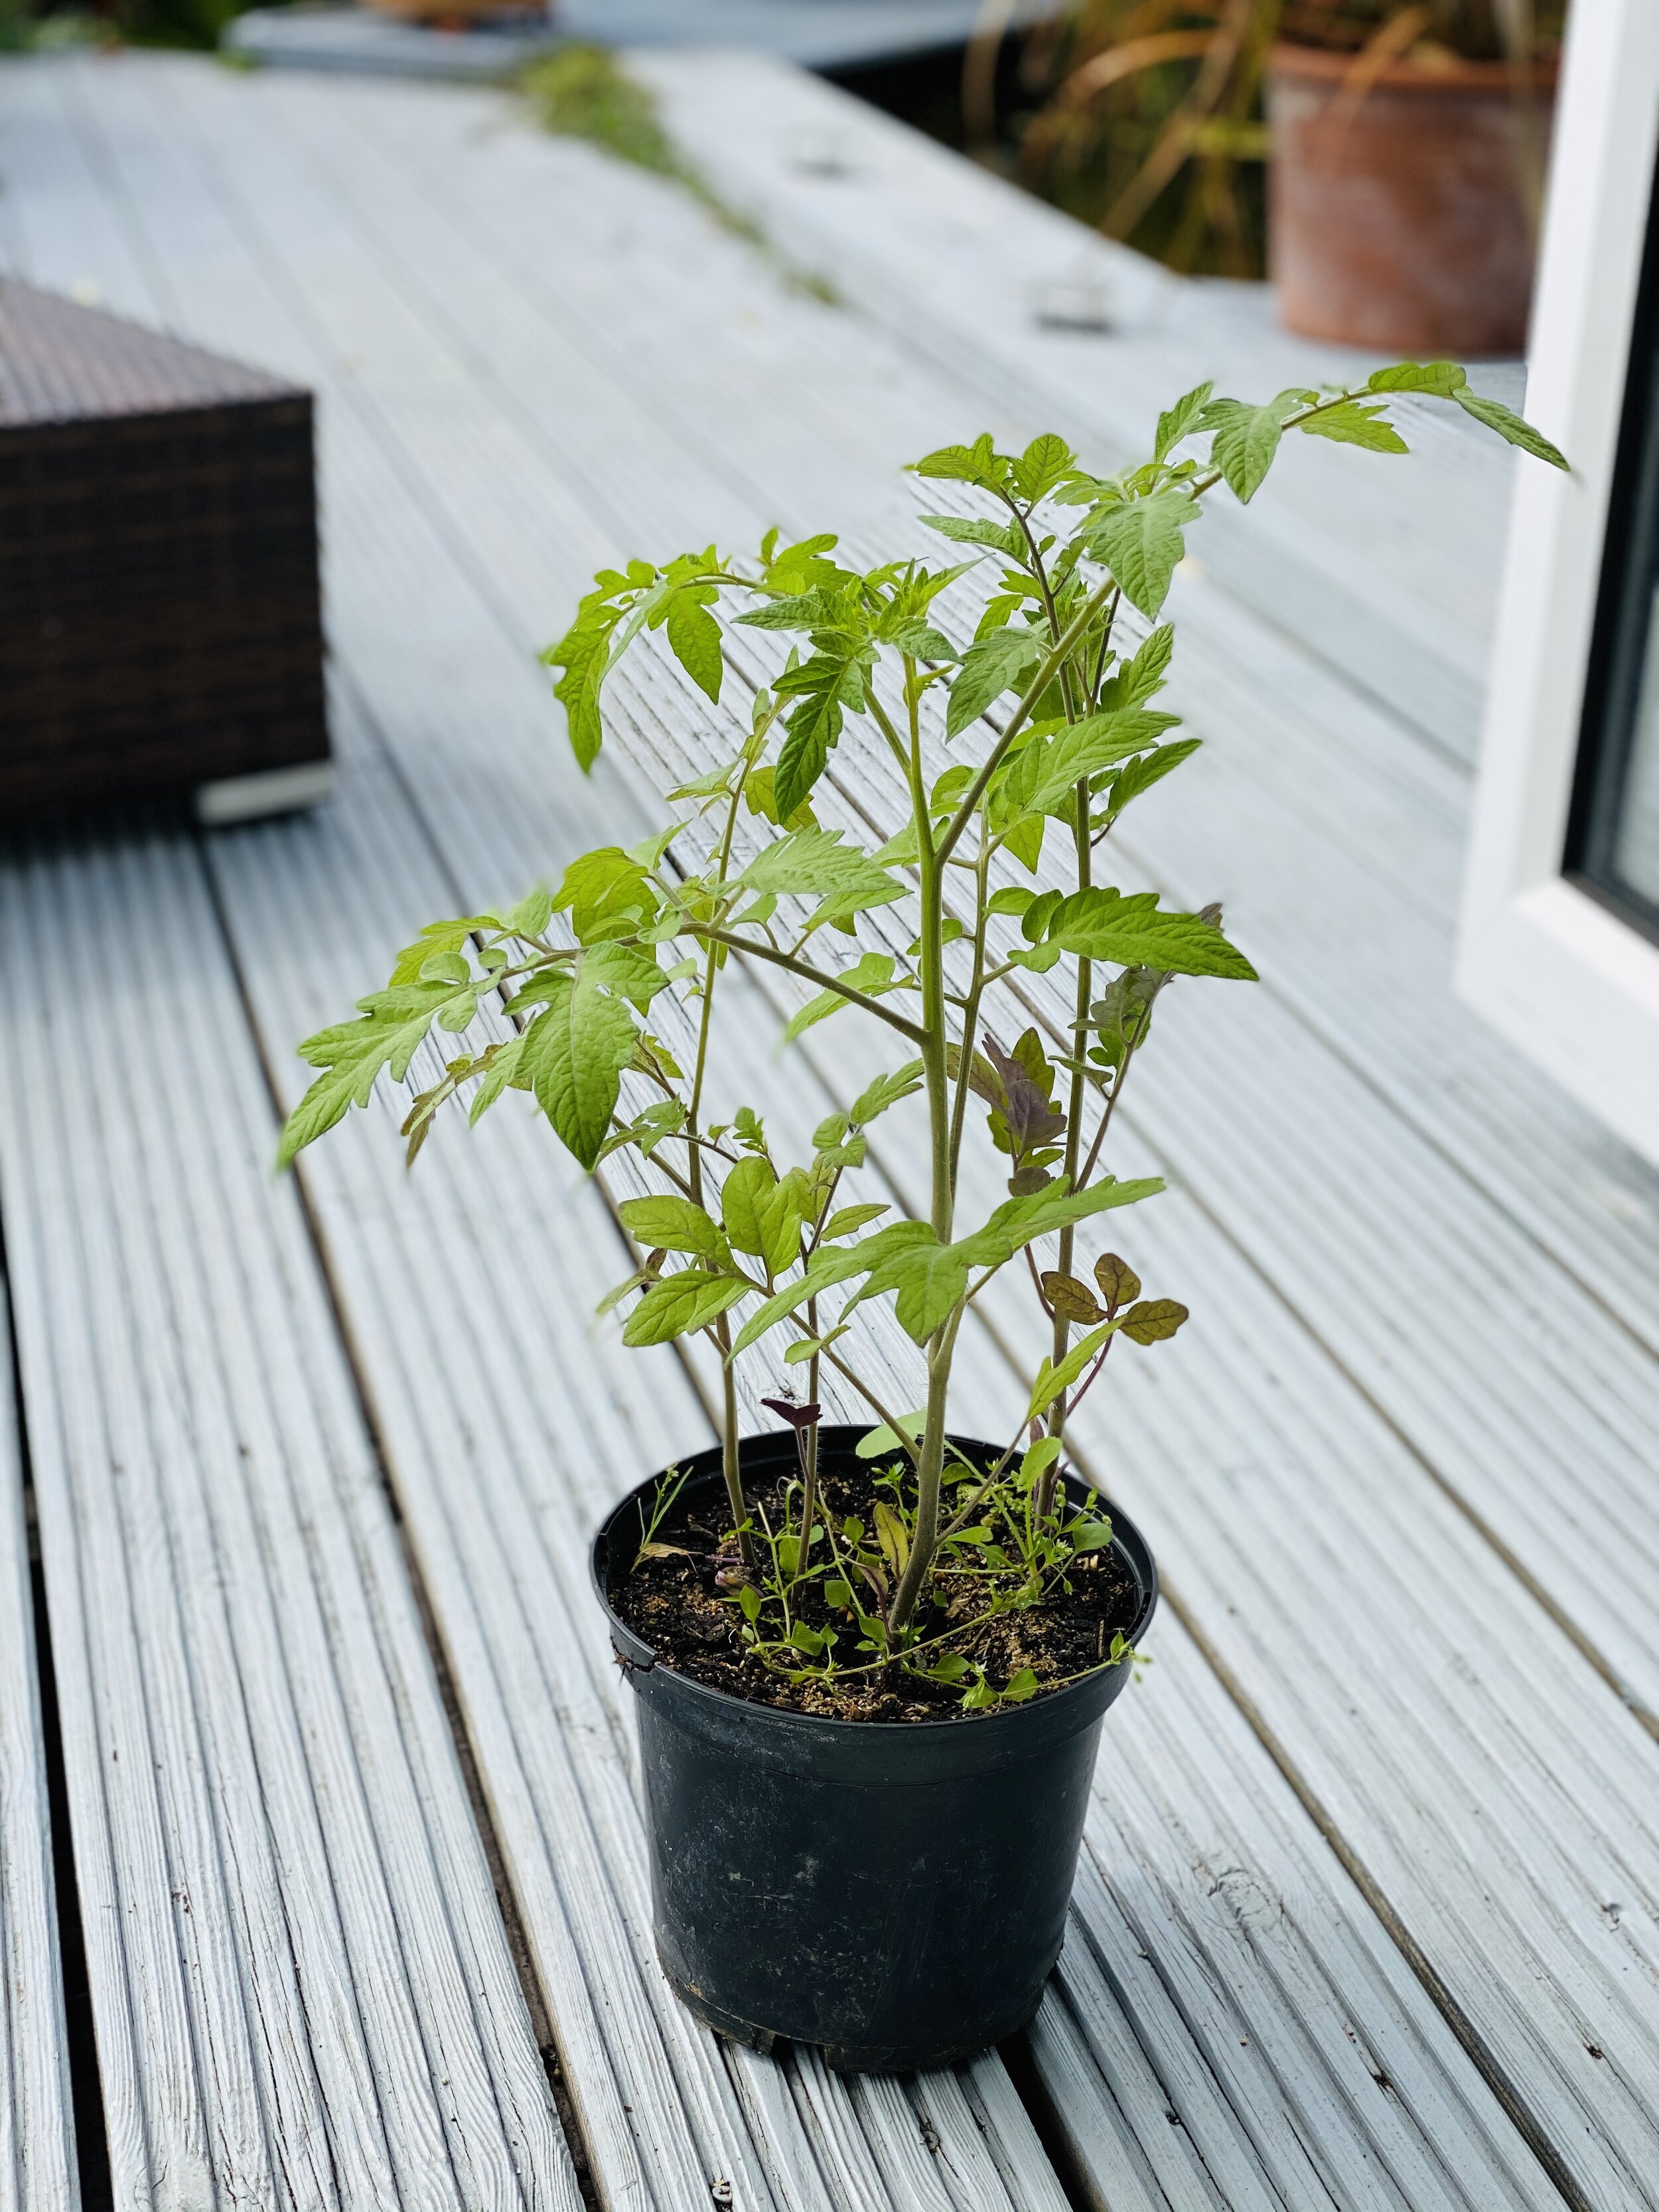 Tomato plants grown from tomato slices.